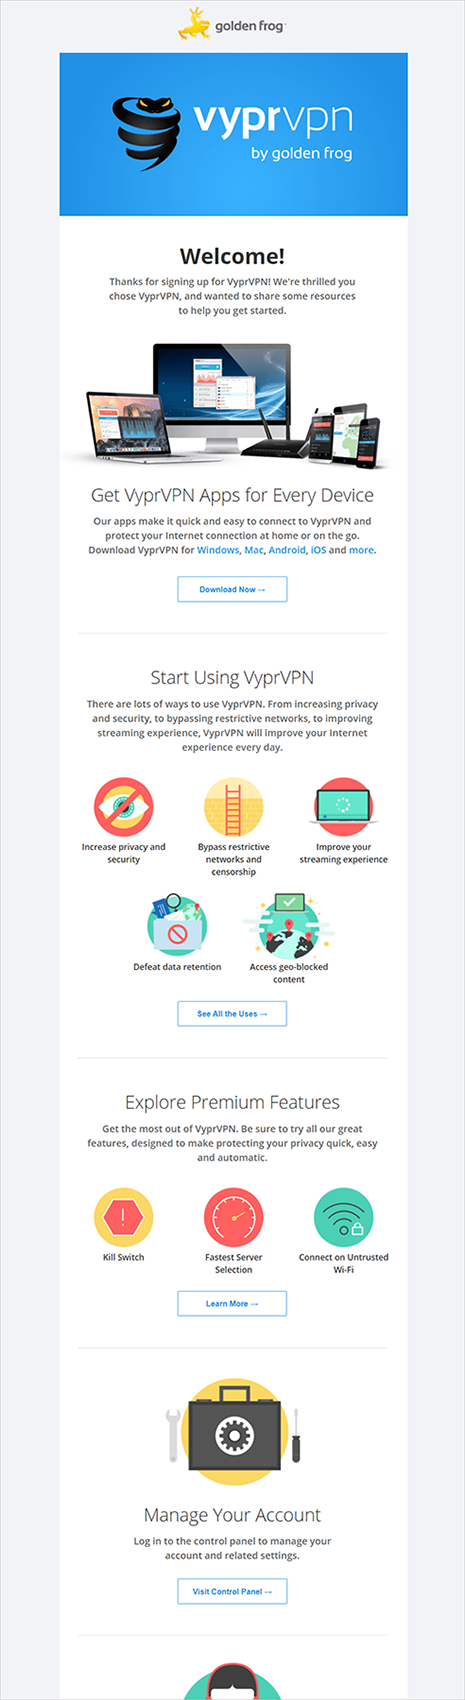 adding value with tips example - vyprvpn's welcome e-mail tells the customer how they can "get vyprvpn apps for every device", "start using vyprvpn", "explore premium features", "manage your account", etc.